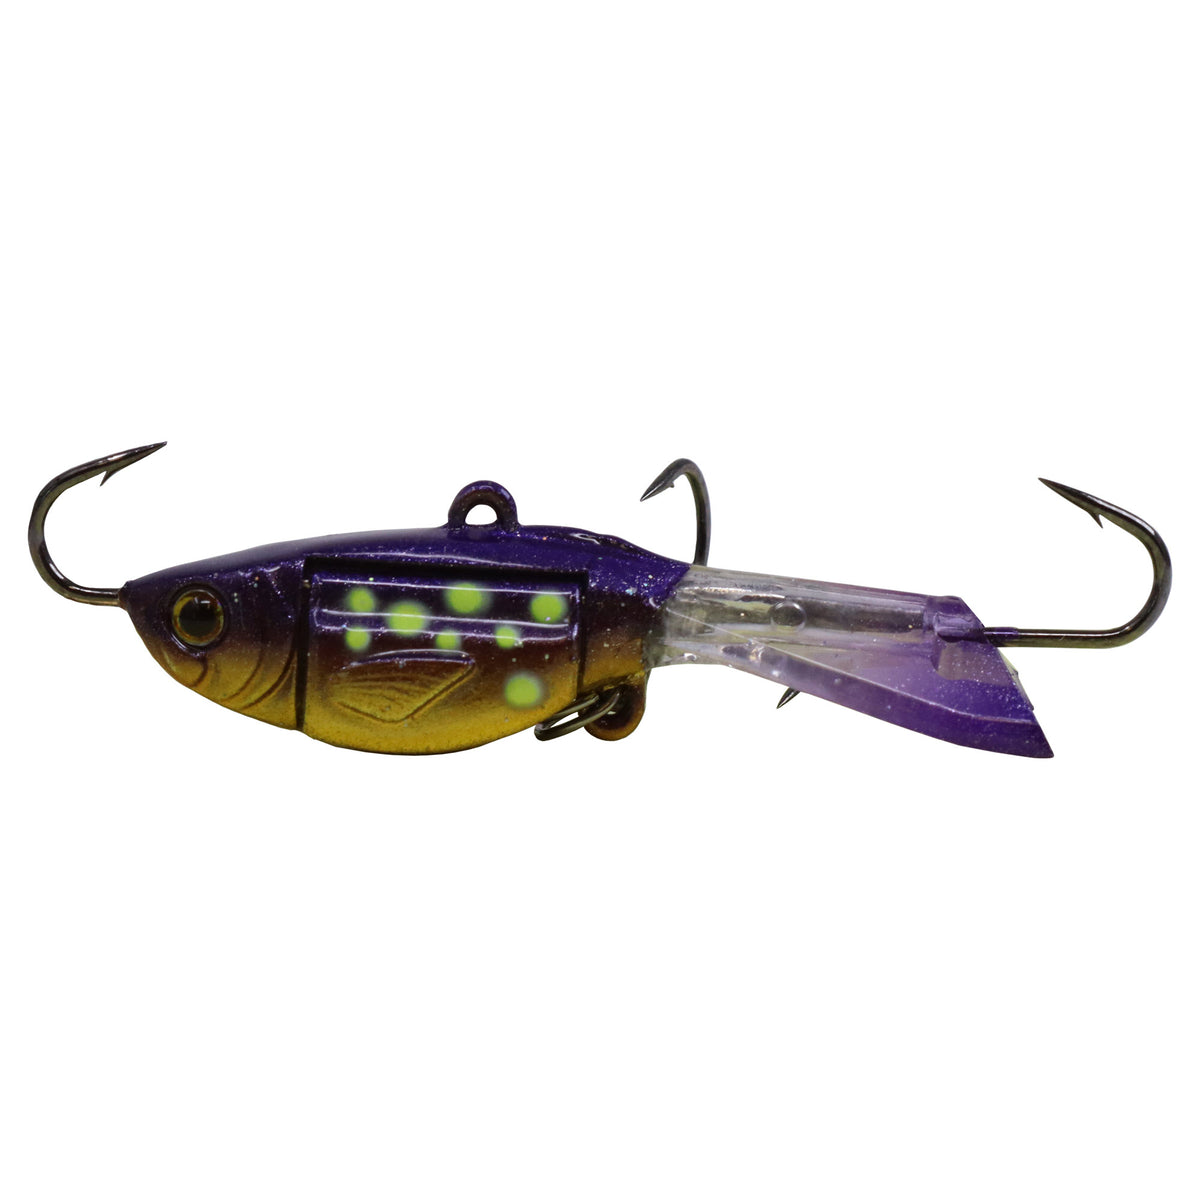 Acme Tackle Company Hyper-Rattle Hard 2.5 Jig Bait HR6 UV Glow CHOOSE YOUR  COLOR!